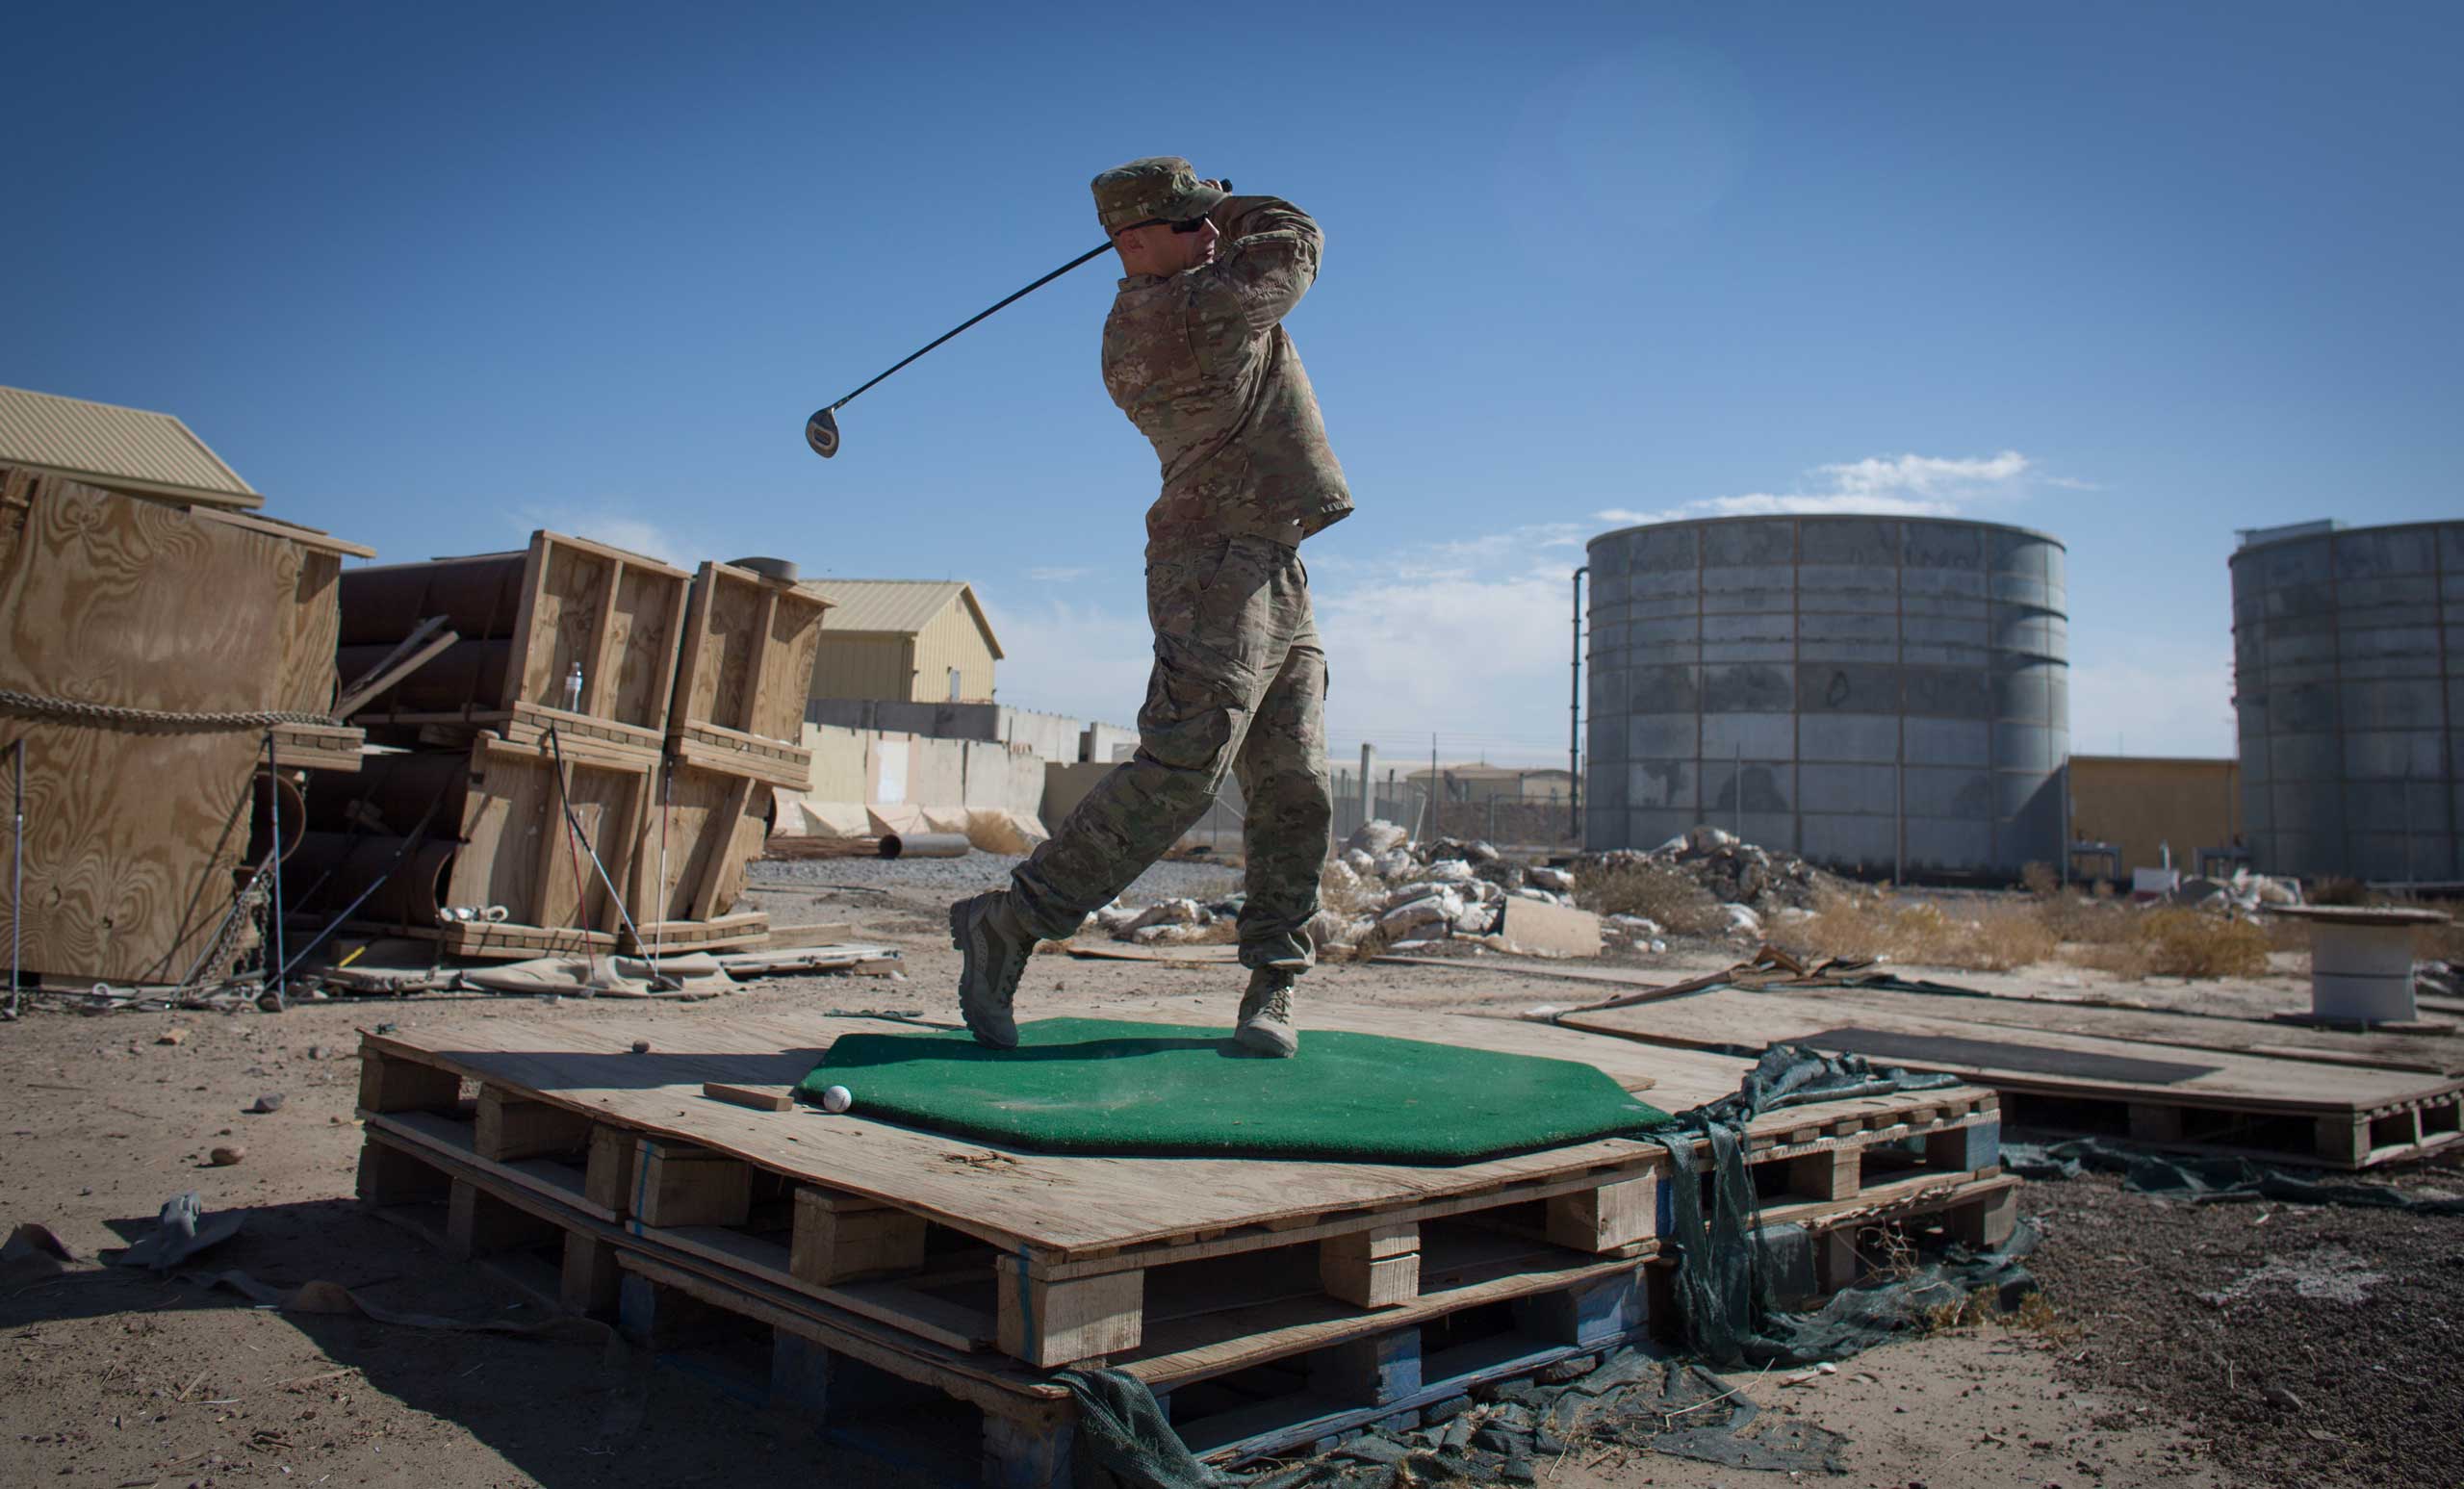 Nov. 10, 2014. First Sergeant Tony Quismundo from the U.S. Army practices his golf on waste ground at Kandahar airfield in Kandahar, Afghanistan.